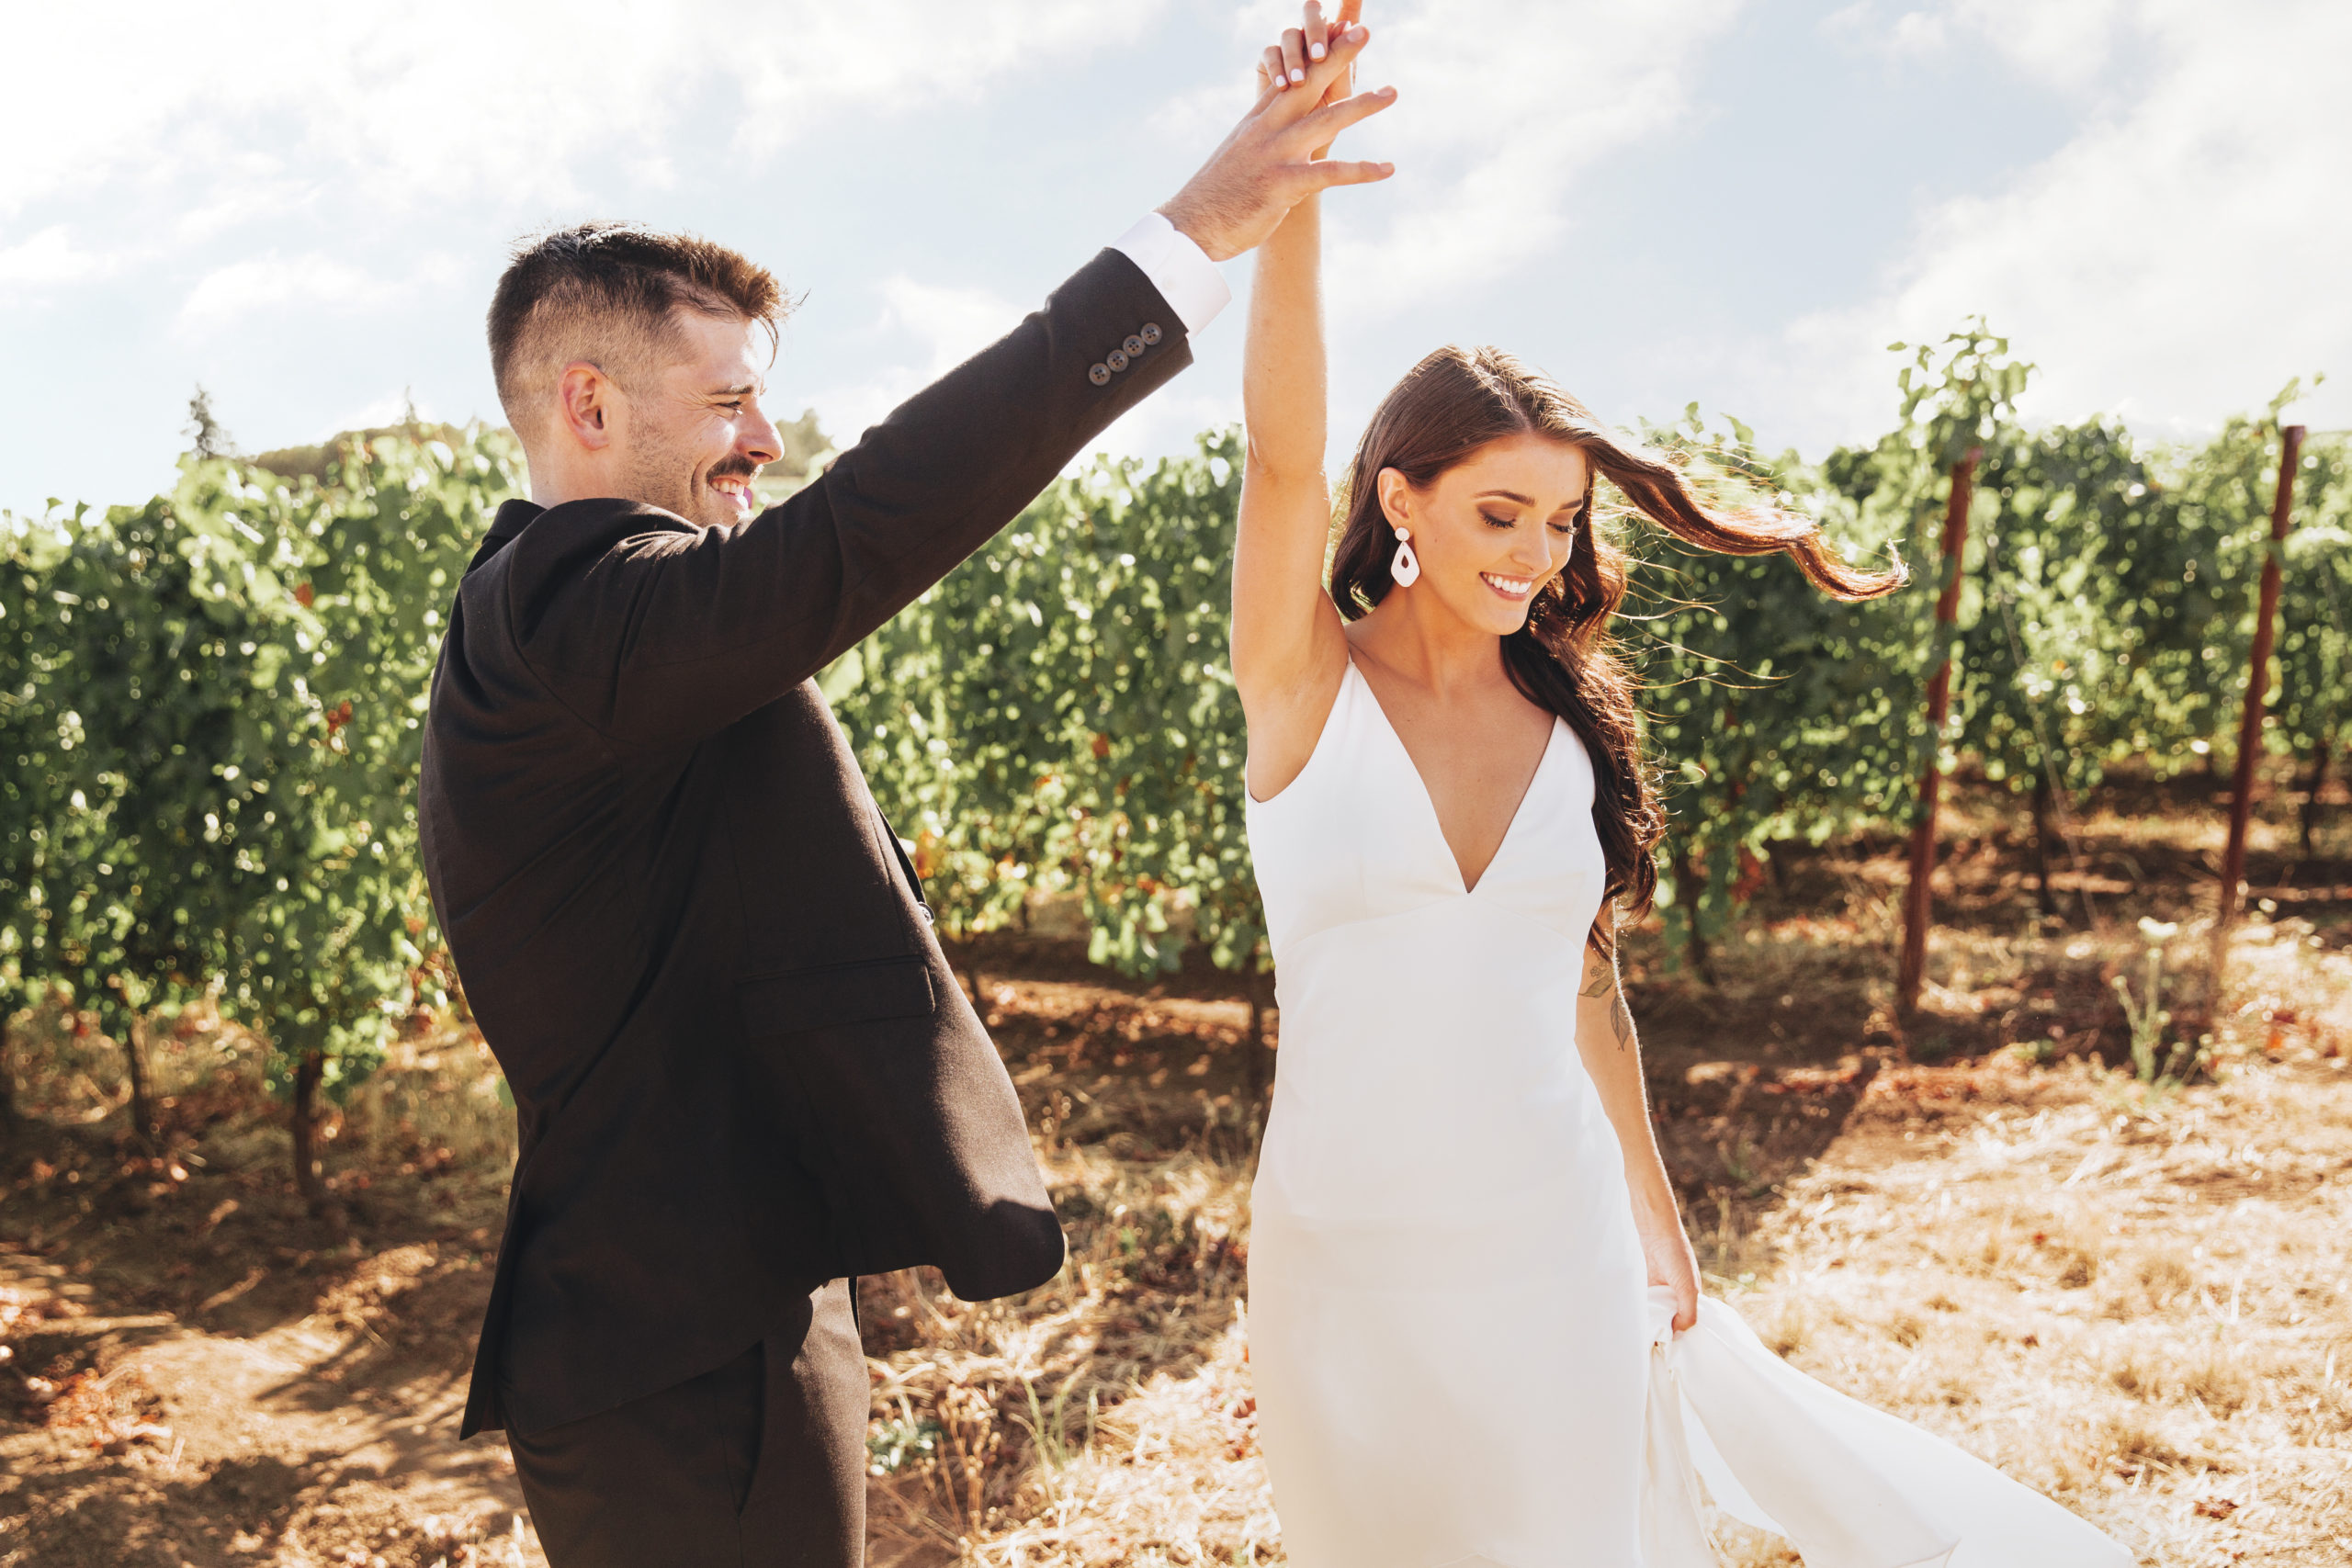 Wedding photography of a couple outdoors dancing